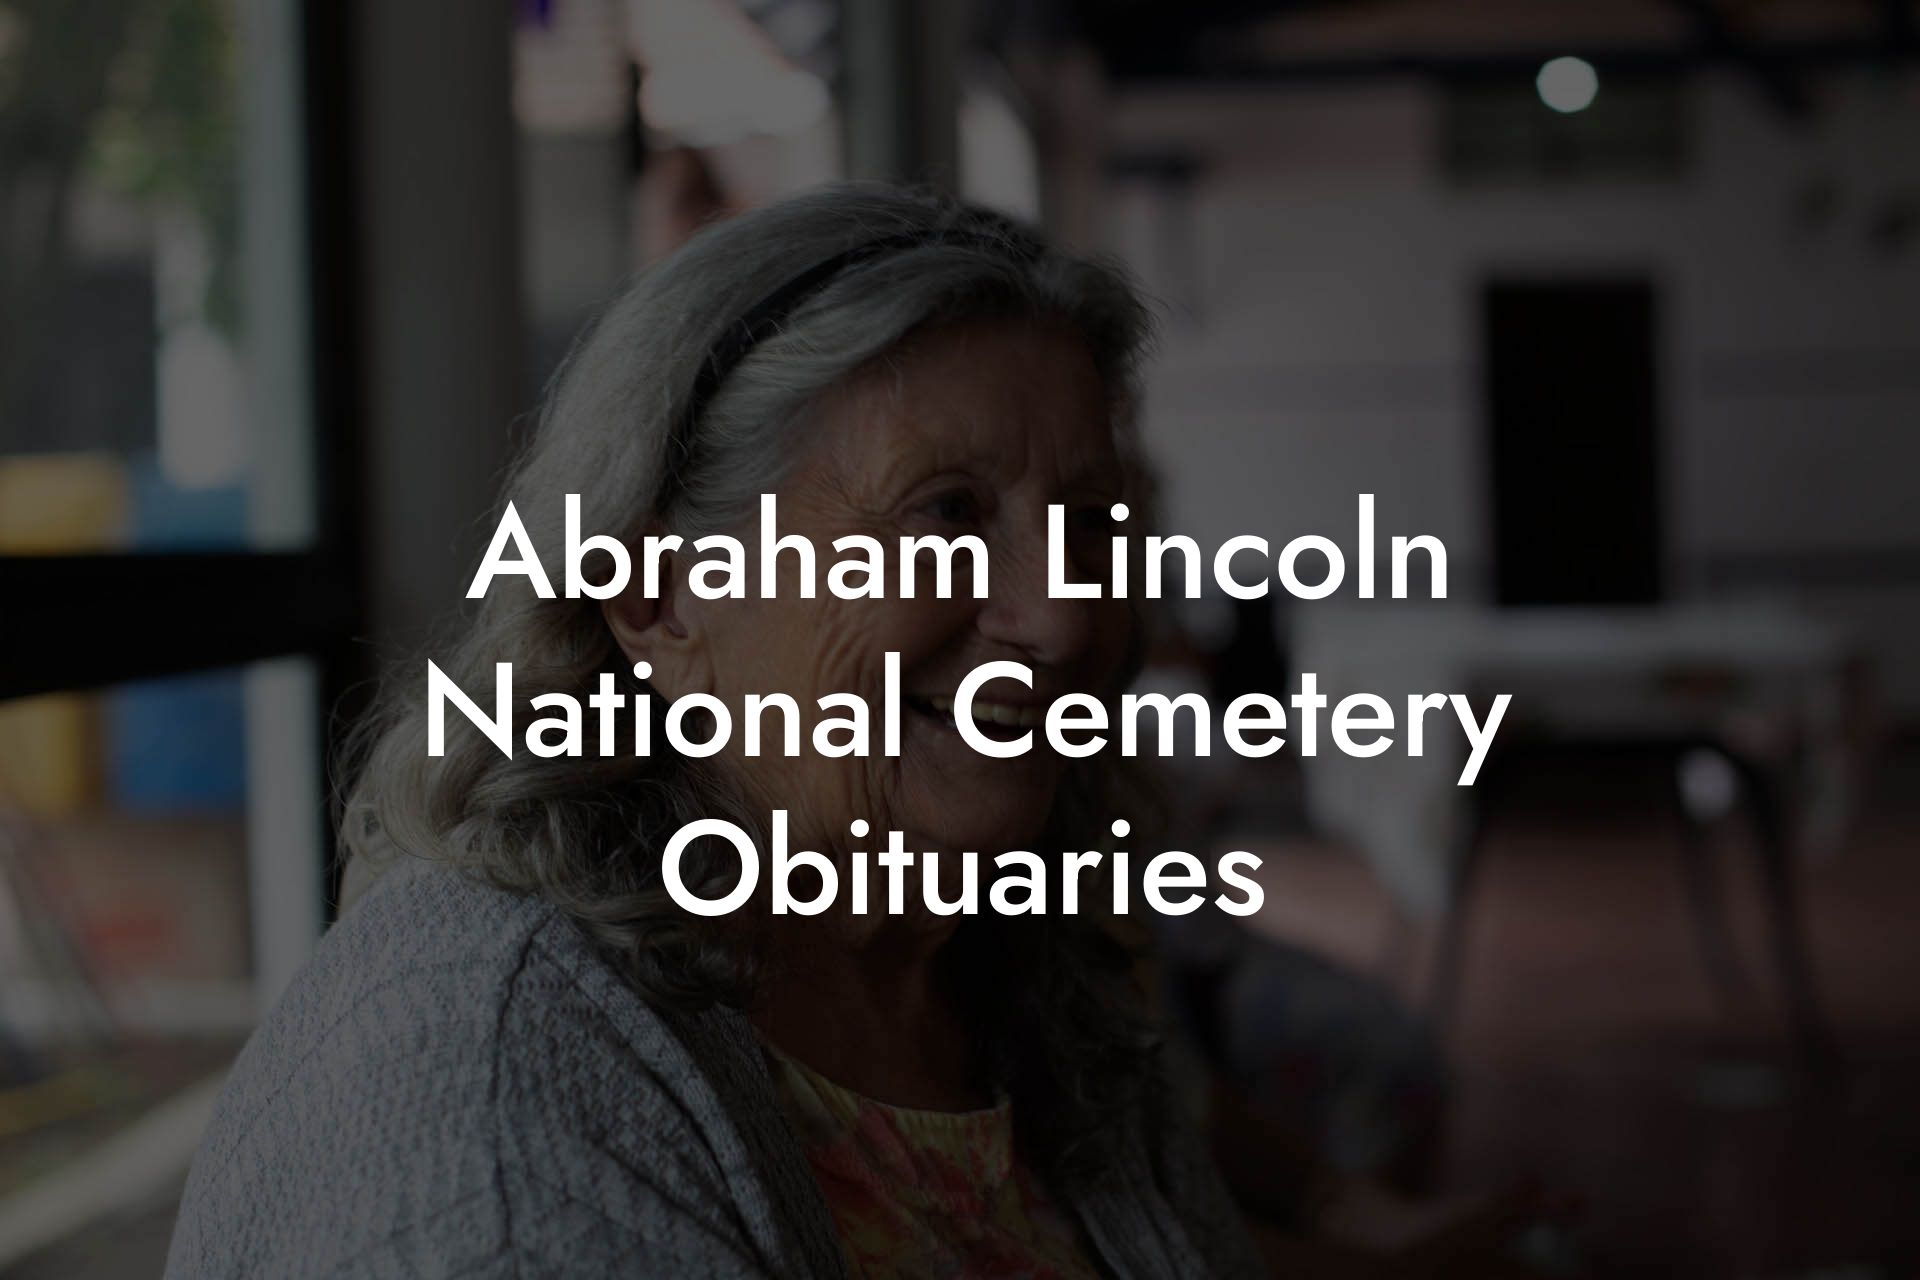 Abraham Lincoln National Cemetery Obituaries